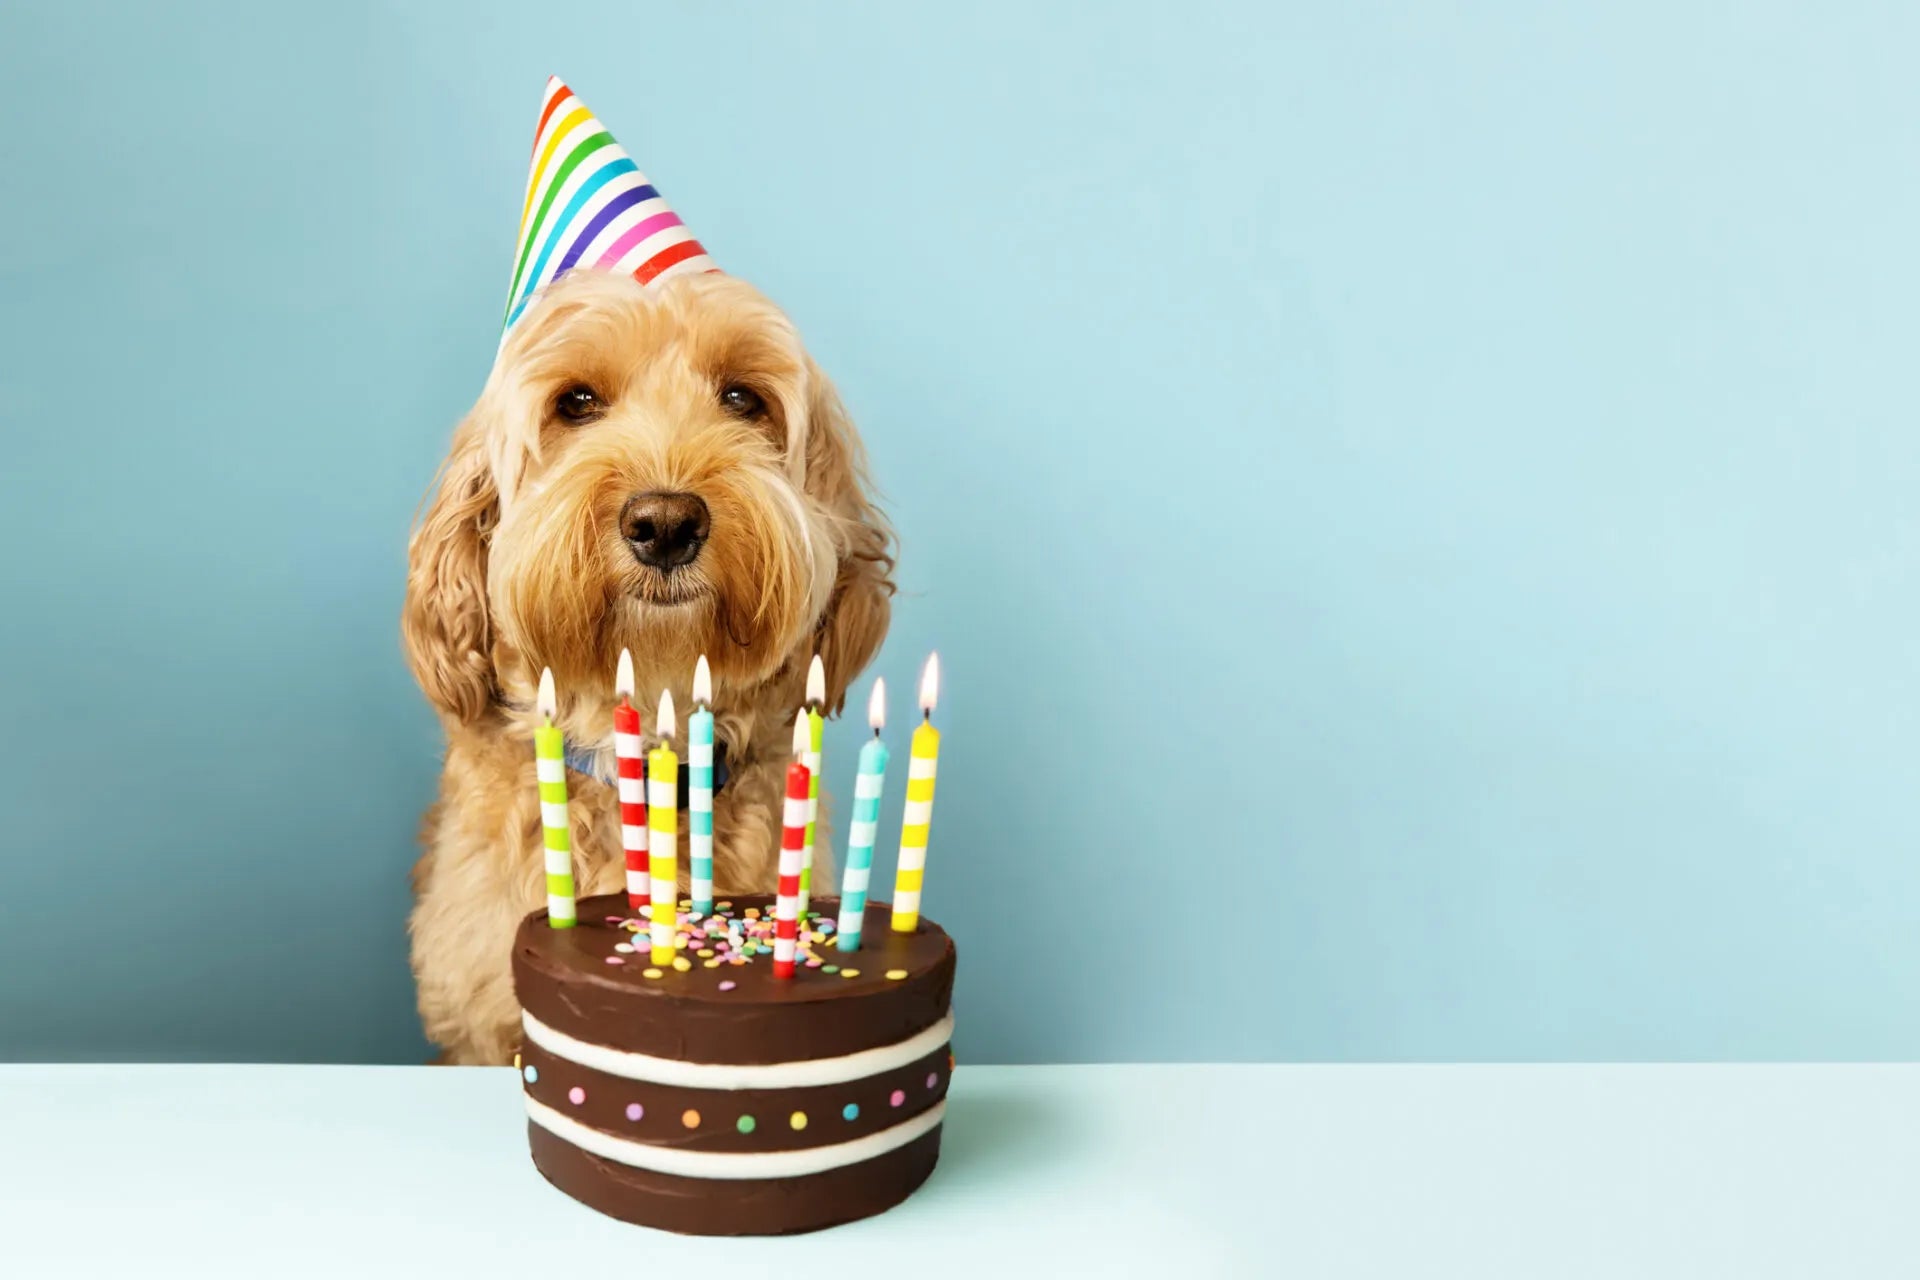 How to celebrate your dog’s birthday?